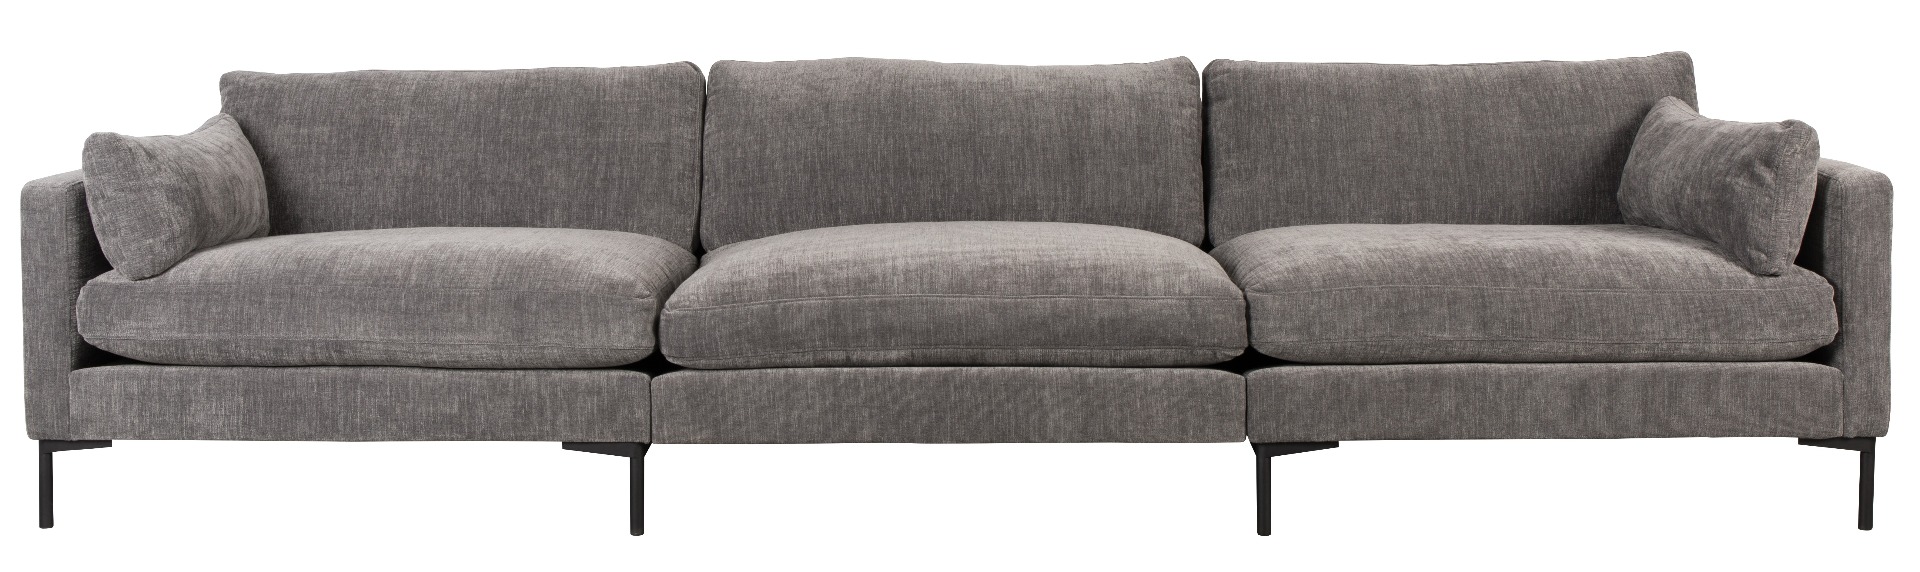 Sofa Summer 4.5 Seater in Anthracite